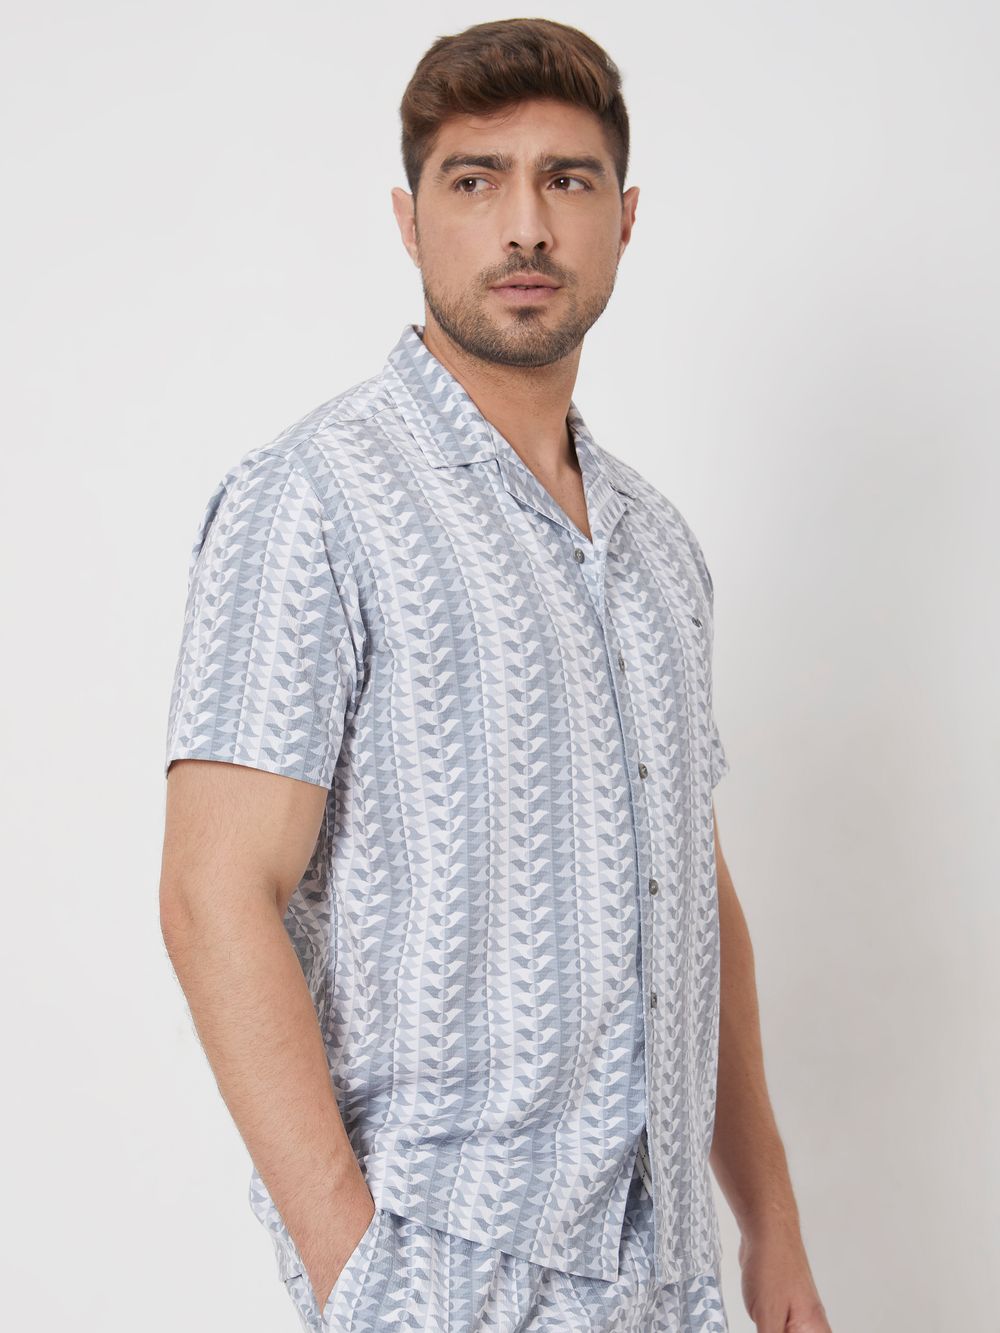 Grey Resort Print Relaxed Fit Casual Shirt